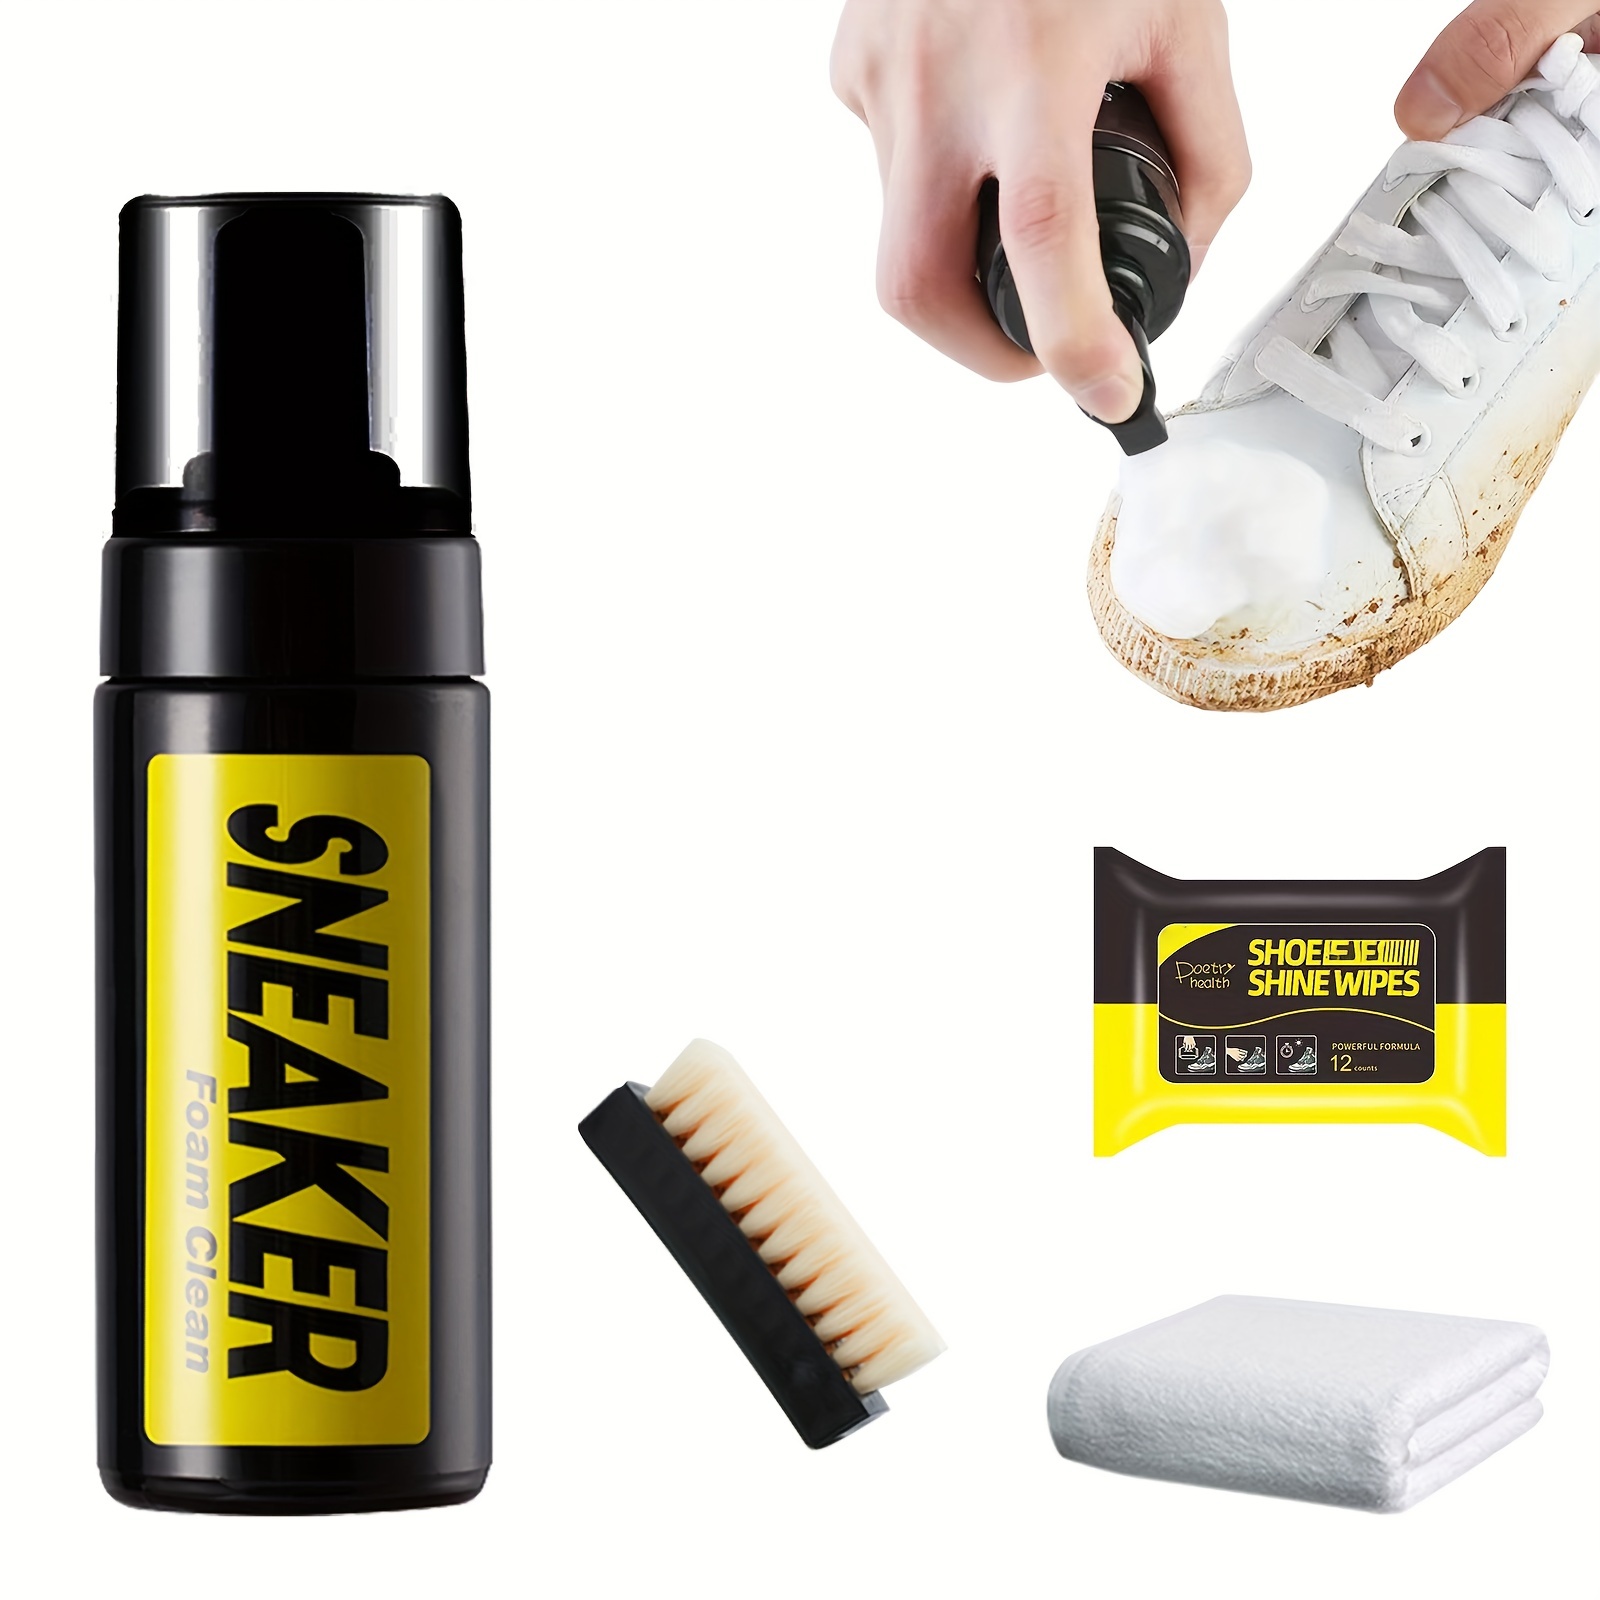 COZGO Shoe Cleaner Kit for Sneaker, Water-Free Foam Sneaker Cleaner 5.3Oz  with Shoe Brush and Shoe Cloth,Work on White Shoe,Suede,Boot ,Canvas,PU,Fabric,etc